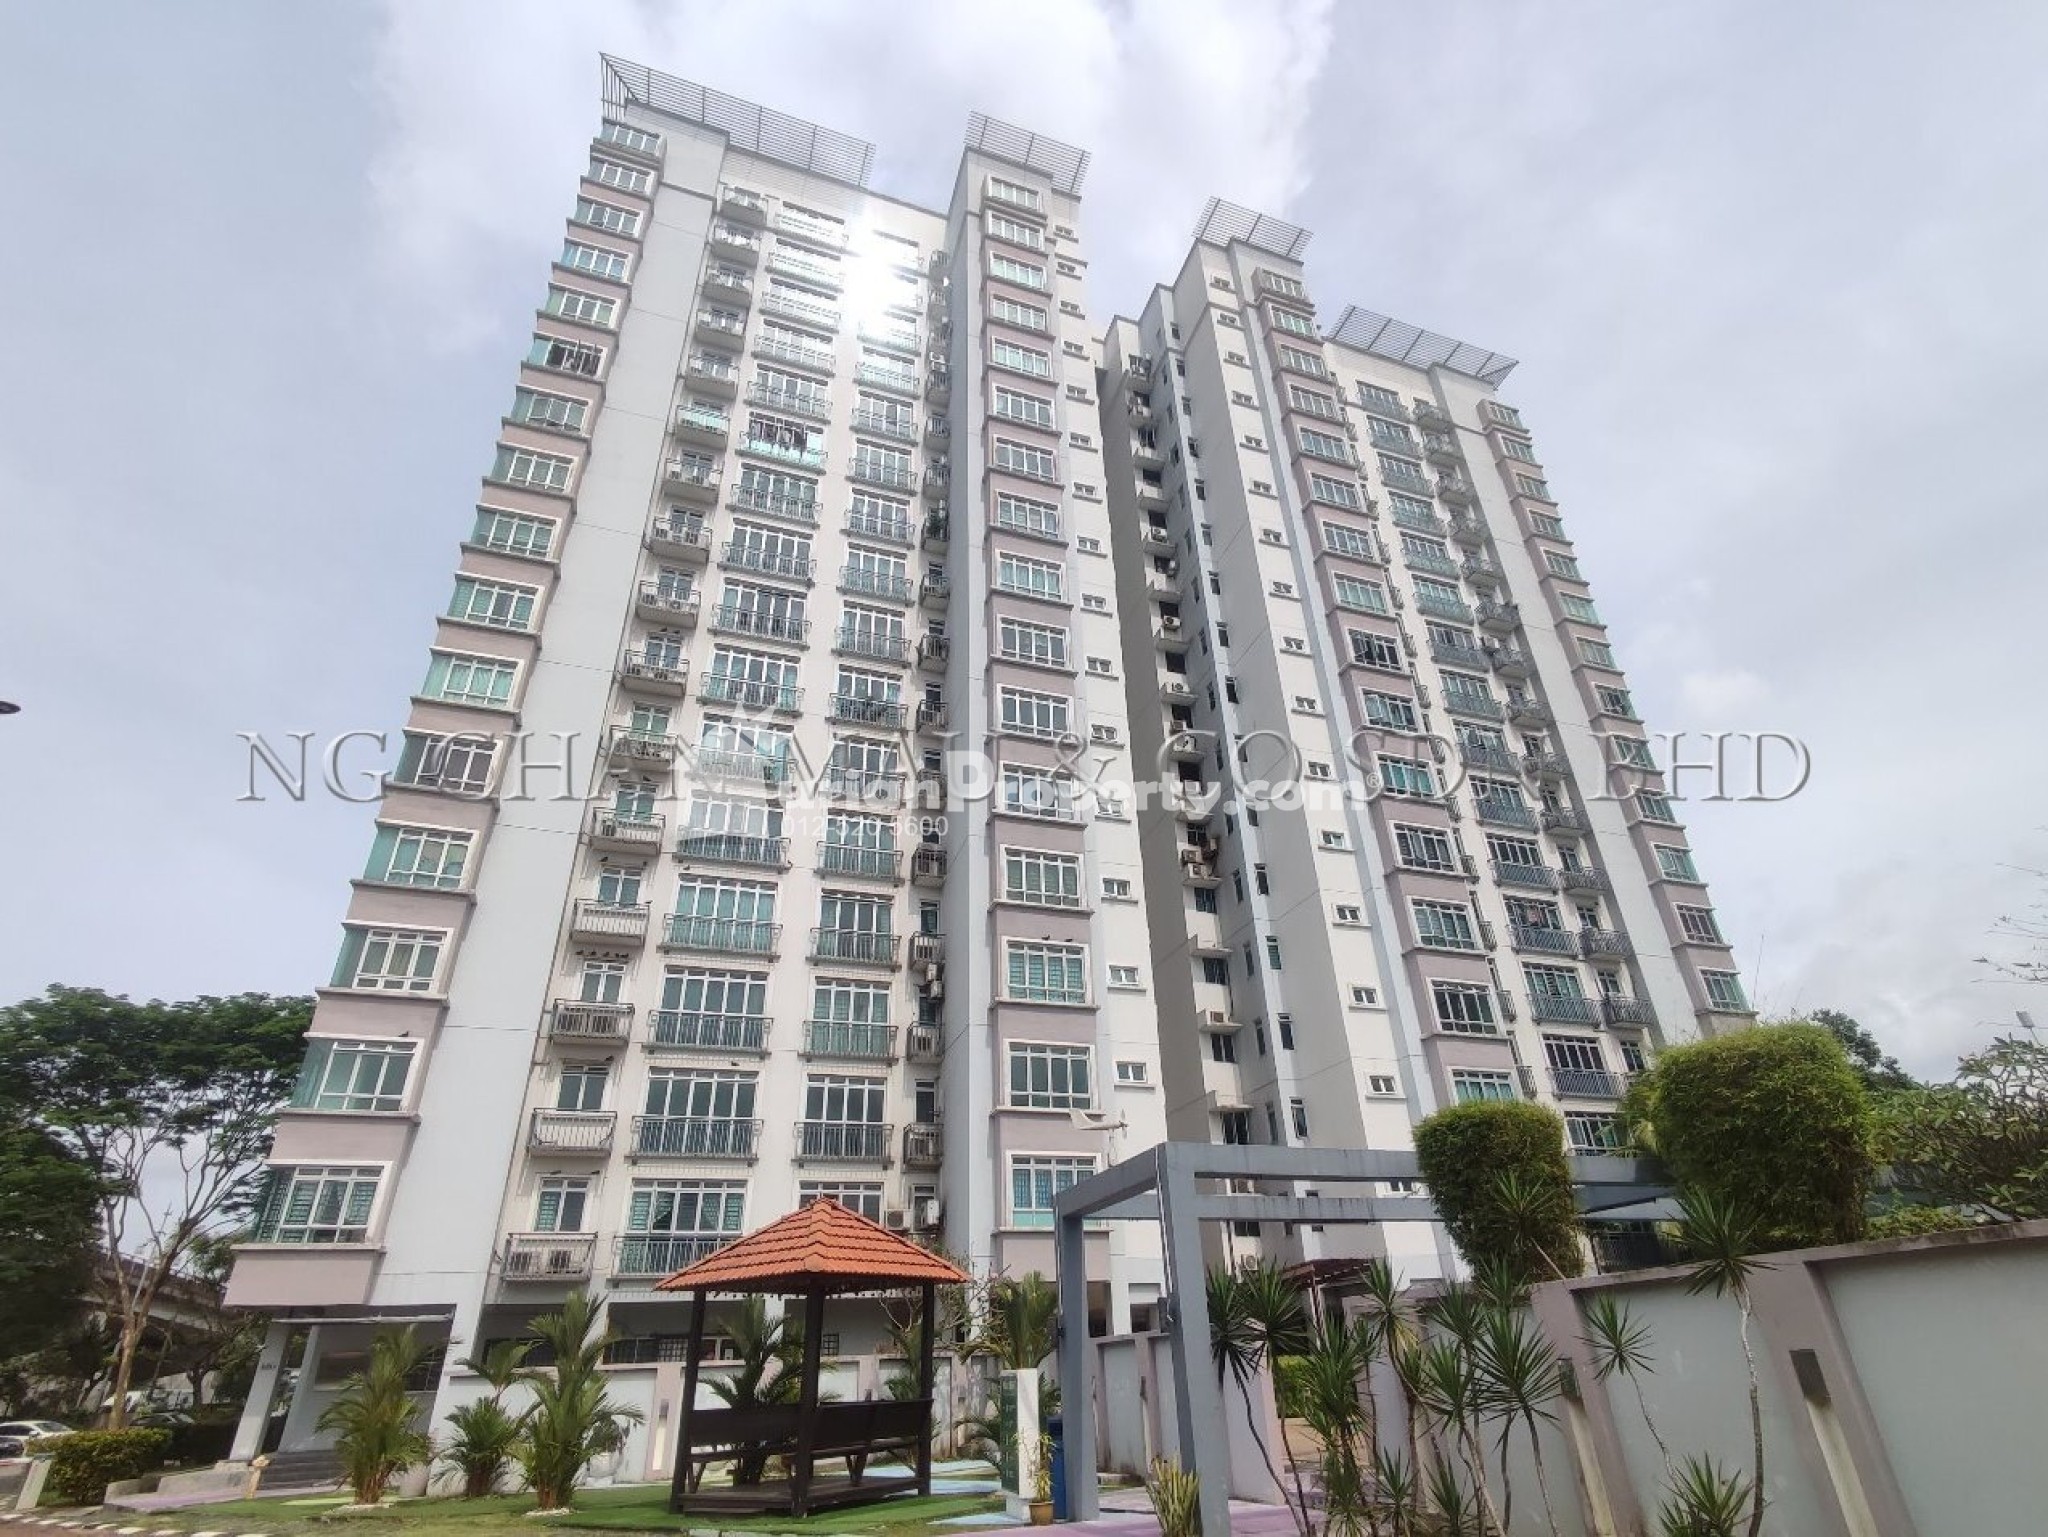 Apartment For Auction at Pulai View